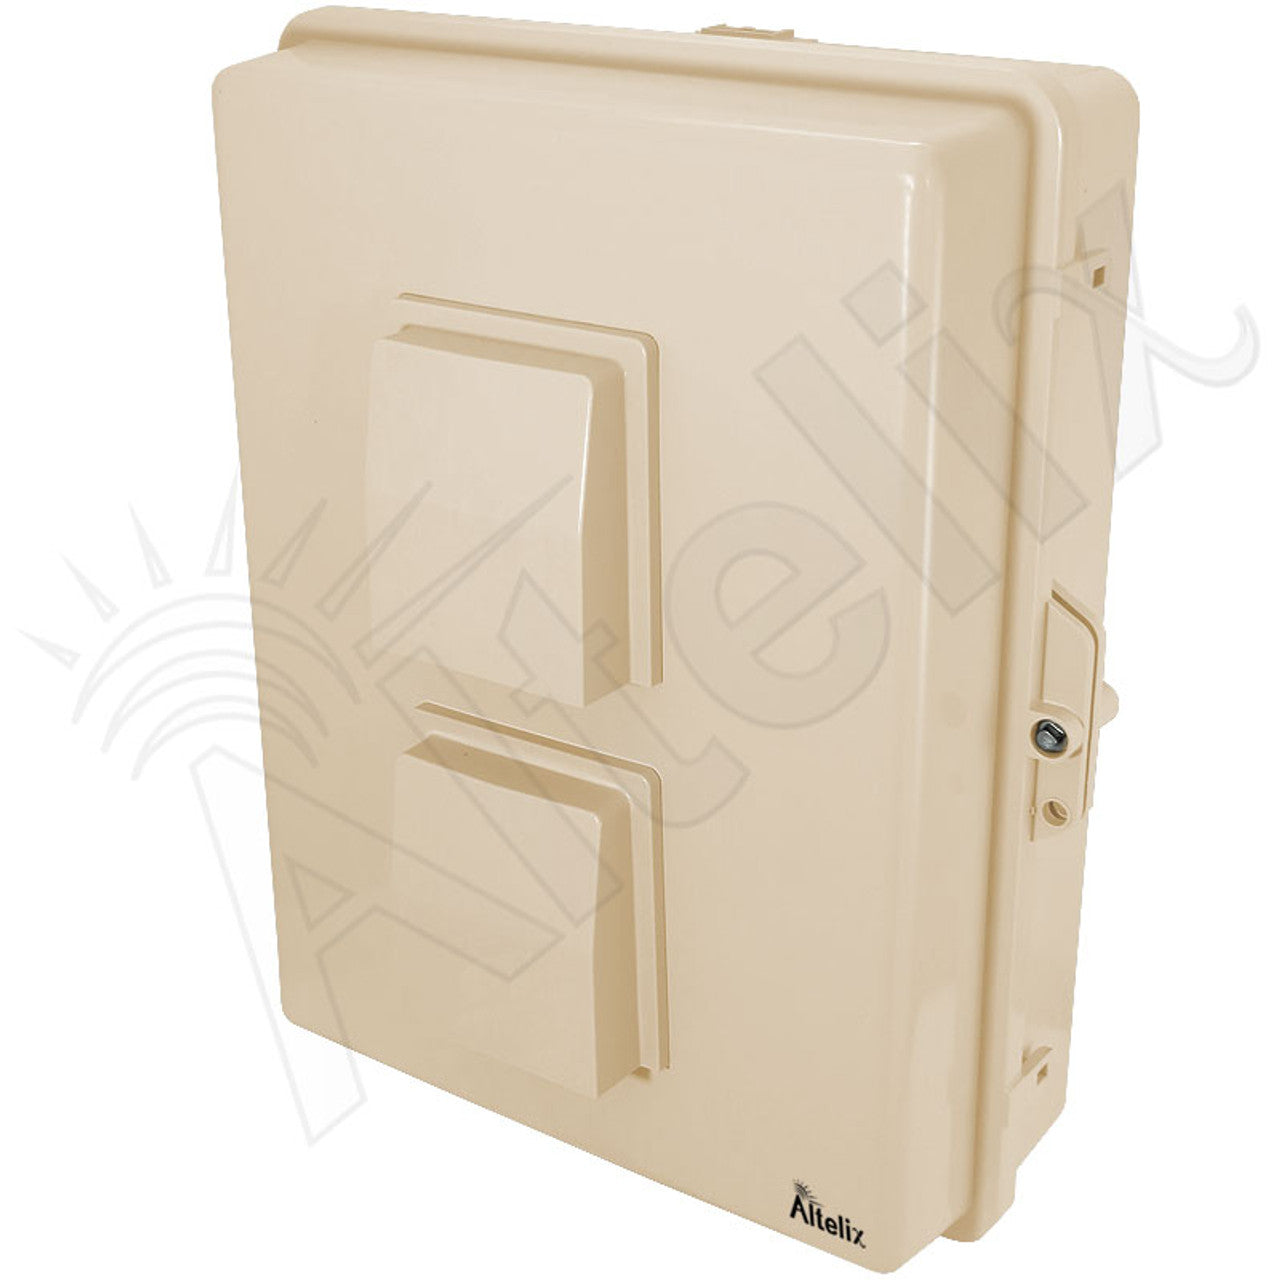 Altelix Vented Weatherproof Enclosure for TP-Link¬Æ AC1350 EAP225 V3 Access Point with 120VAC Outlets and Power Cord